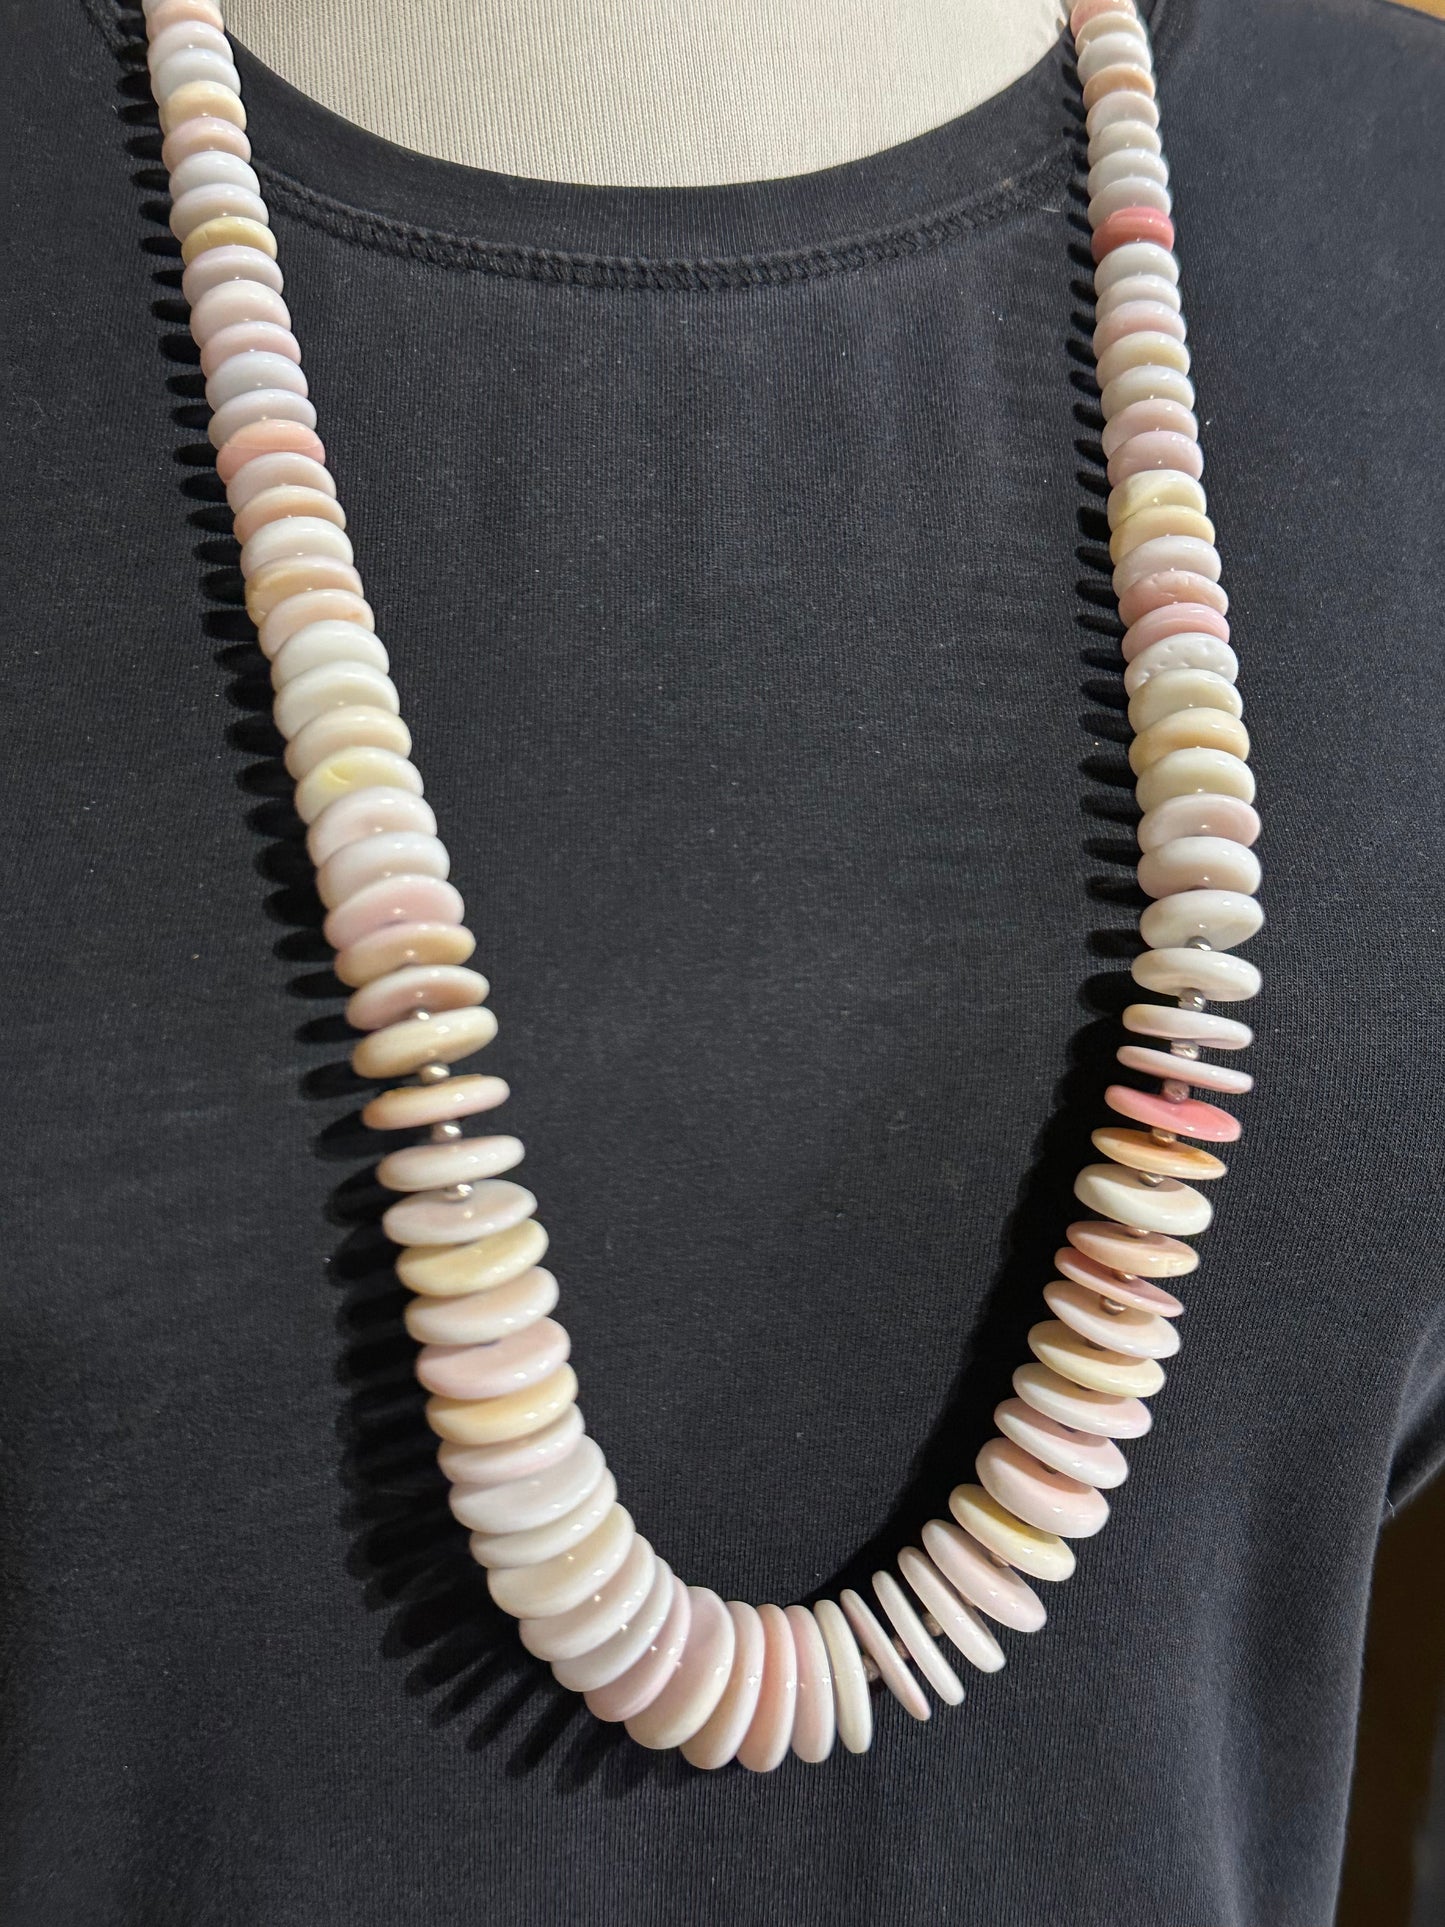 Cotton Candy (Pink Conch Shell) Graduated Necklace 30"